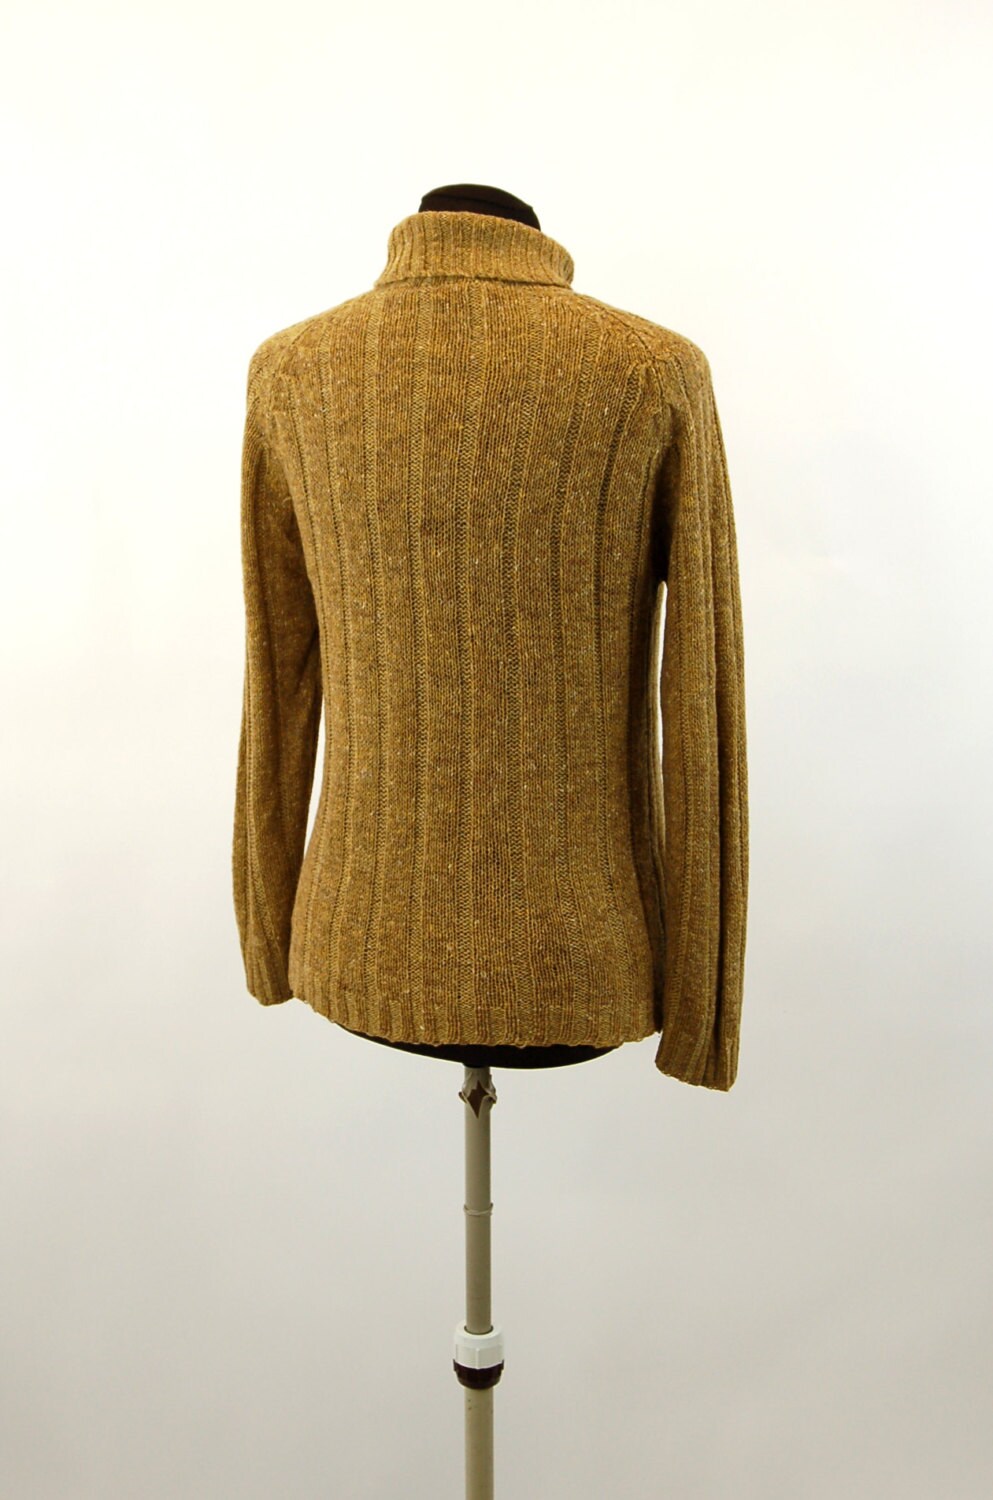 Ribbed turtleneck sweater wool White Stag brown gold Size M